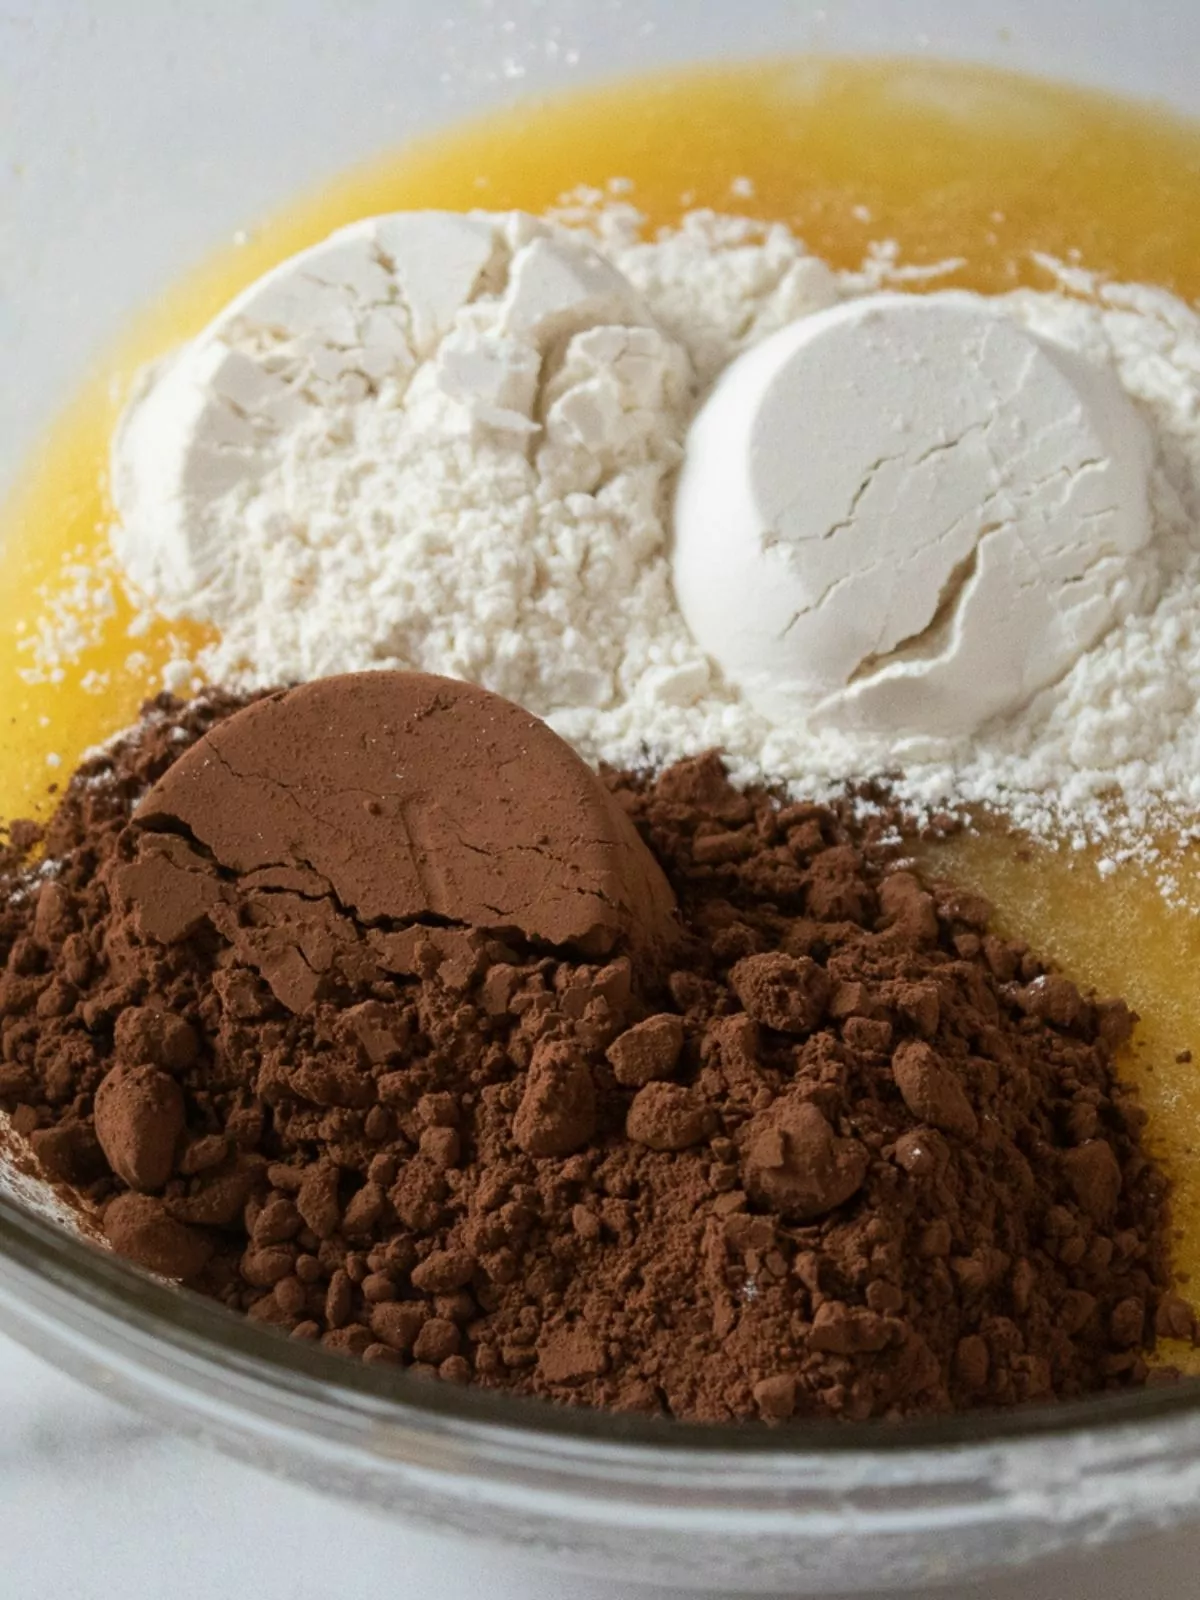 cocoa powder, flour, butter mixture in bowl.